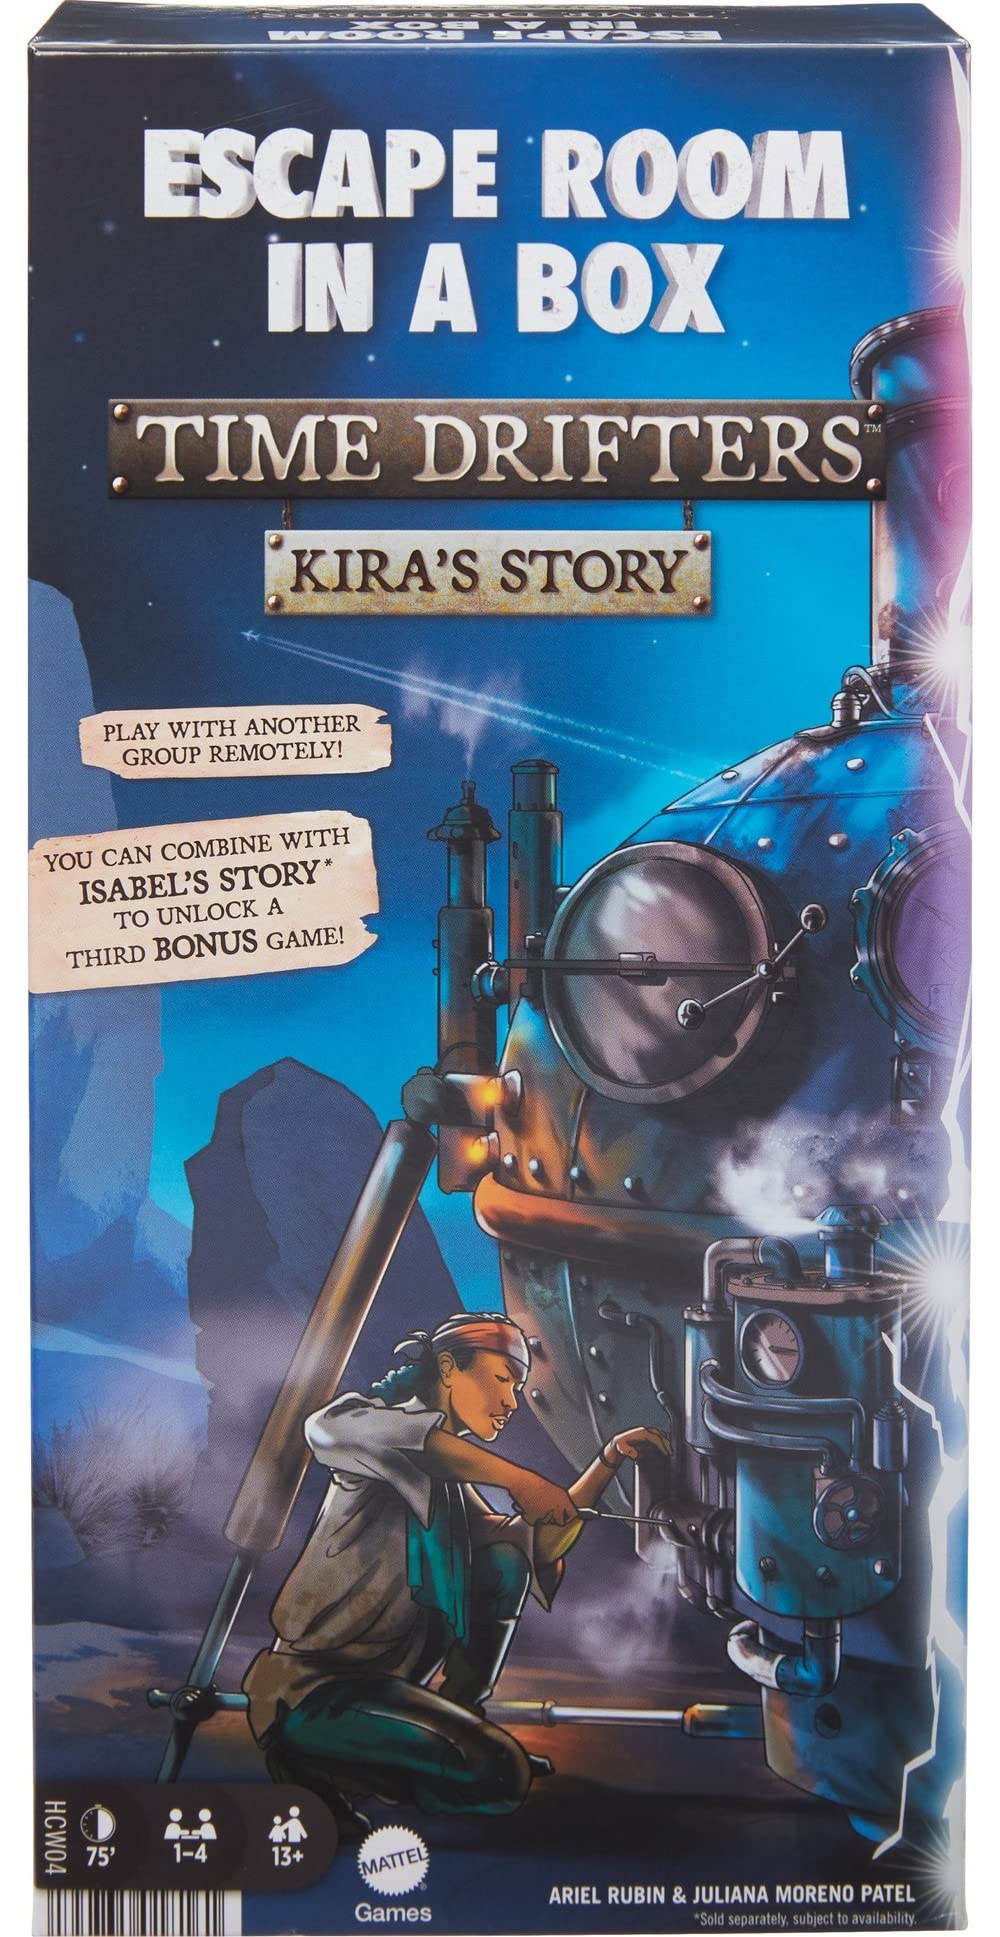 Escape Room in A Box: TIME Drifters KIRA's Story Party Game for 1 to 4 Players with Clues & Puzzles, Combine with Kira's Story for Remote Play, Gift for for 13 Year Olds & Up